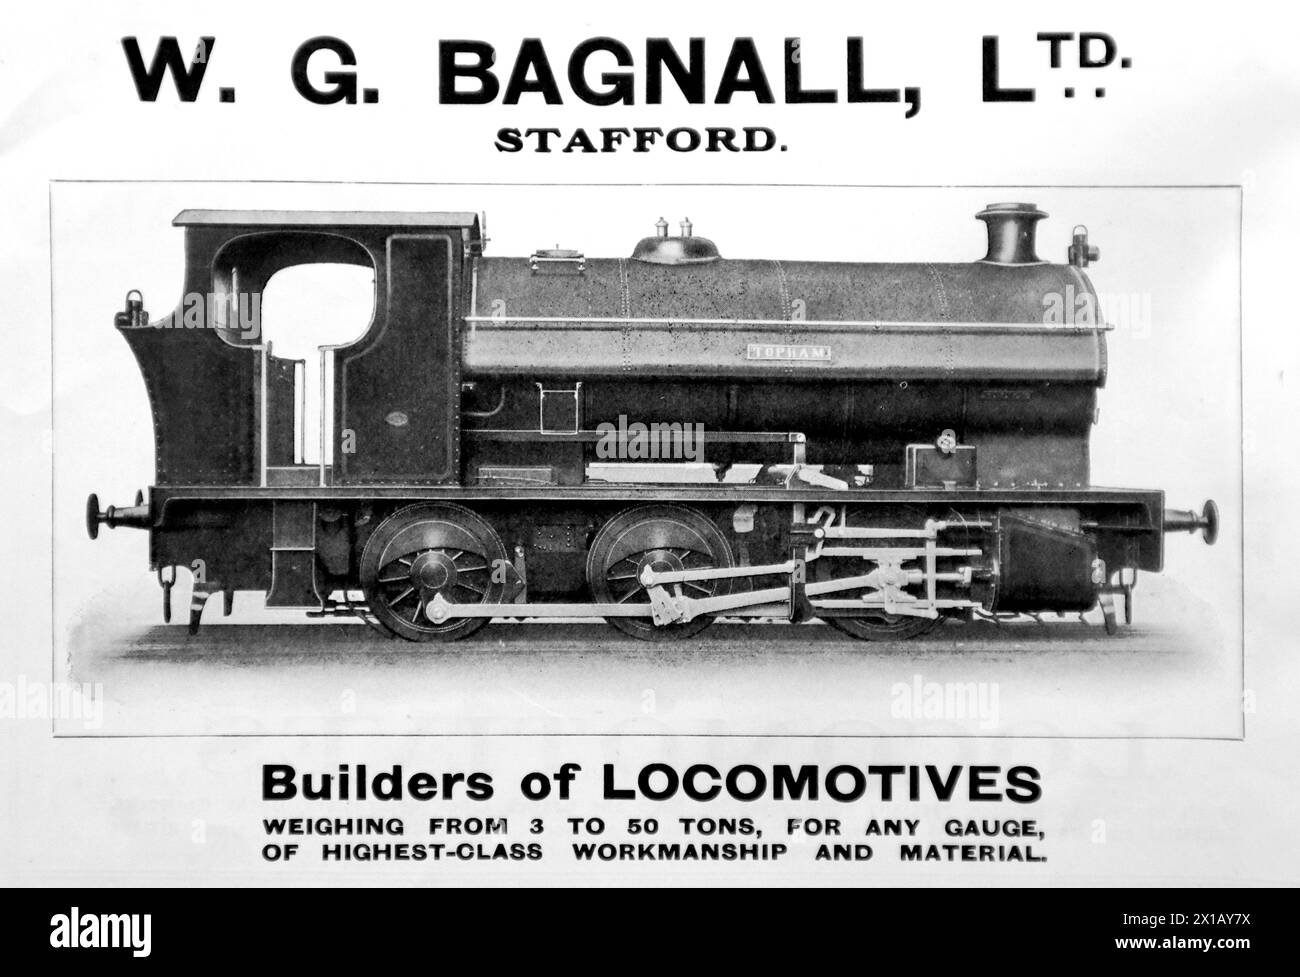 Advertisement for W. G. Bagnall Ltd, of Stafford. Builders of locomotives, named loco in advert is Topham. From an original publication dated 15 May 1924, this helps to give an insight into public transport, and the railways in particular, of the 1920s. Stock Photo